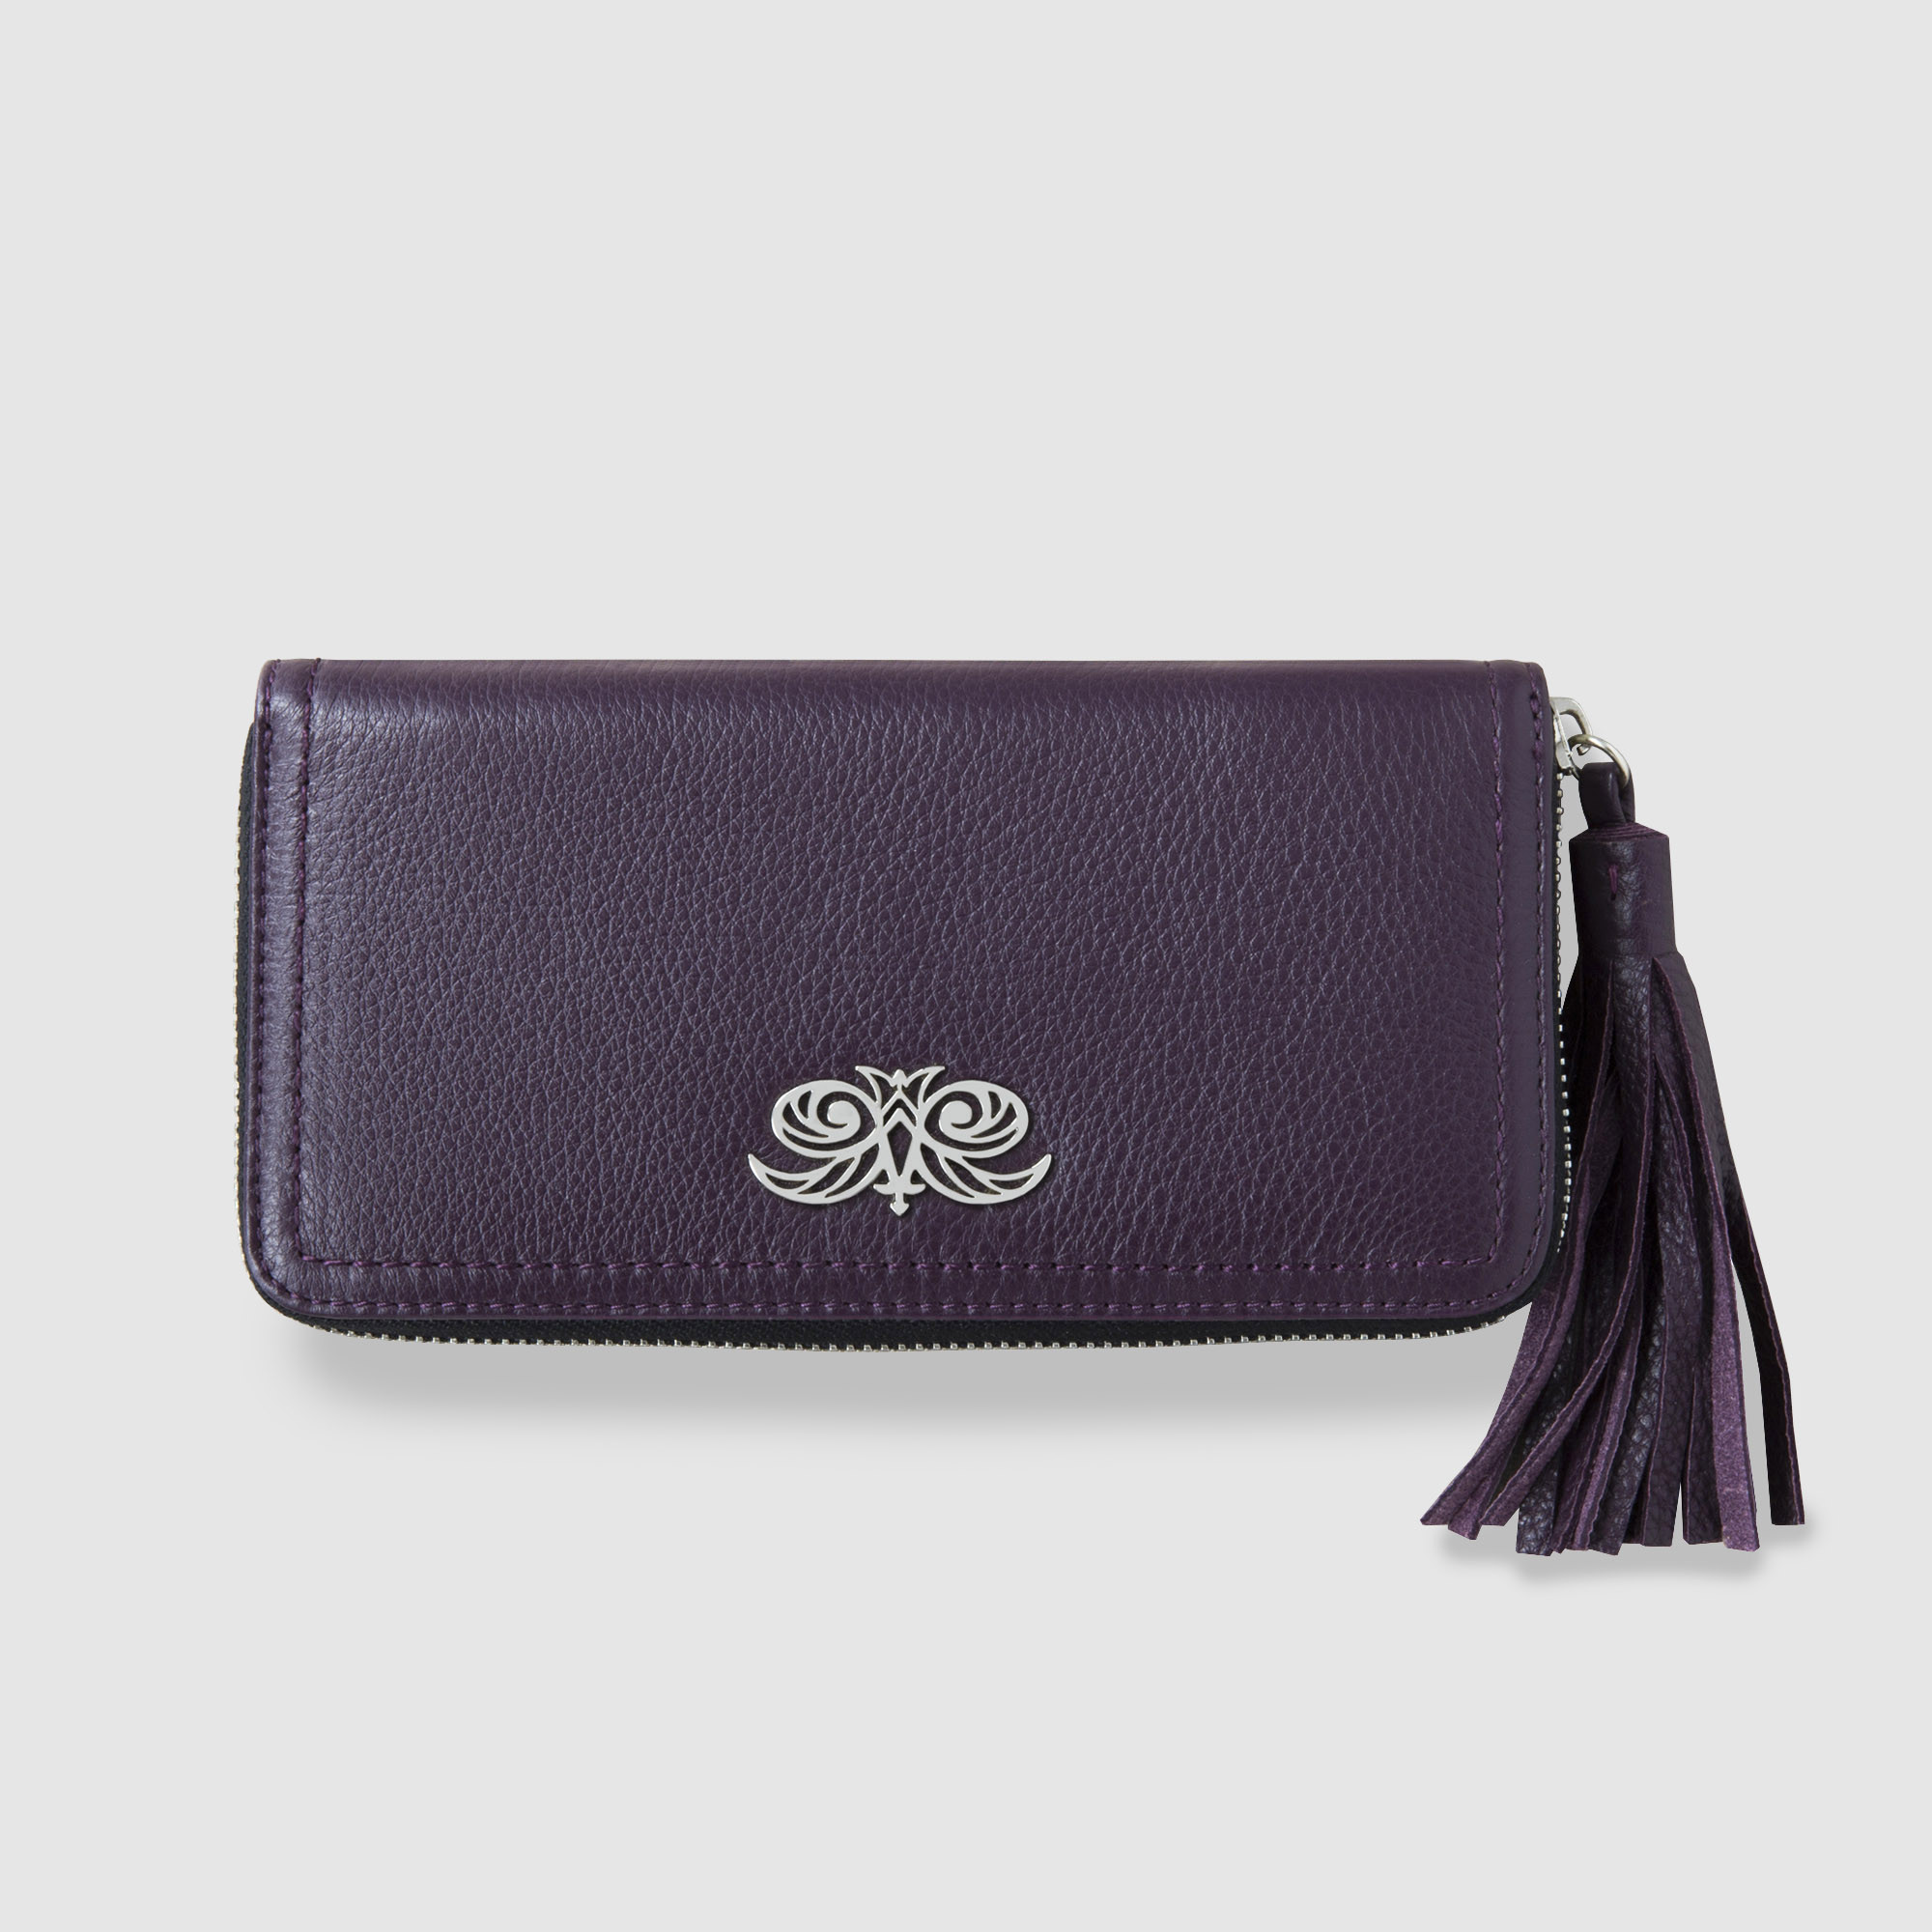 KYOTO, zipped  continental wallet in grained leather, purple color with tassel - front view